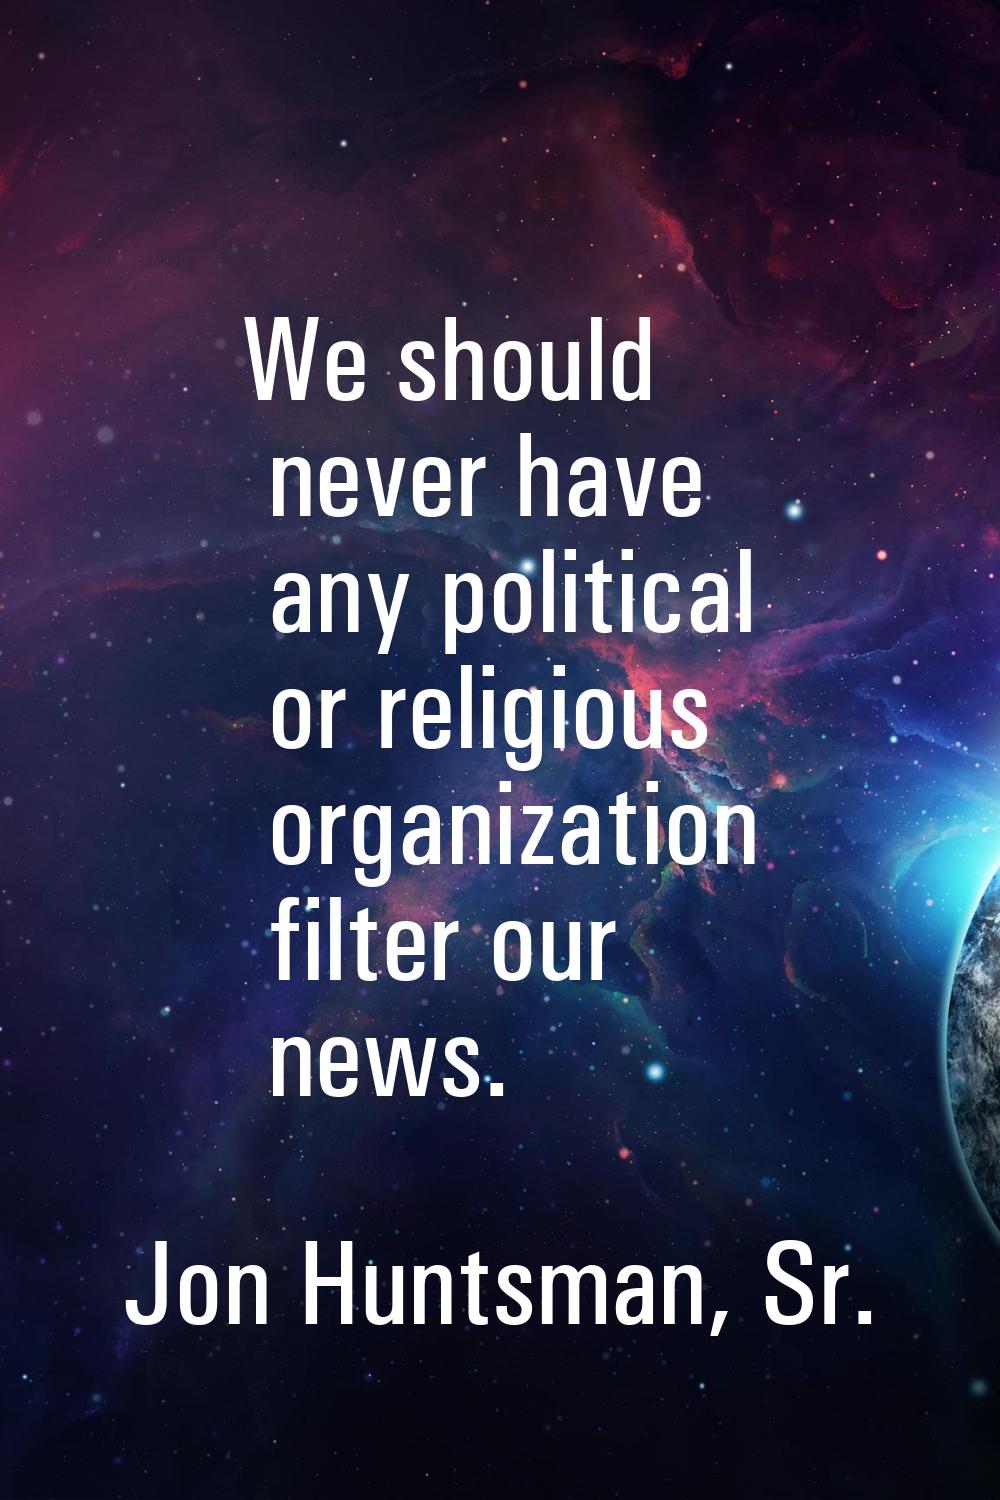 We should never have any political or religious organization filter our news.